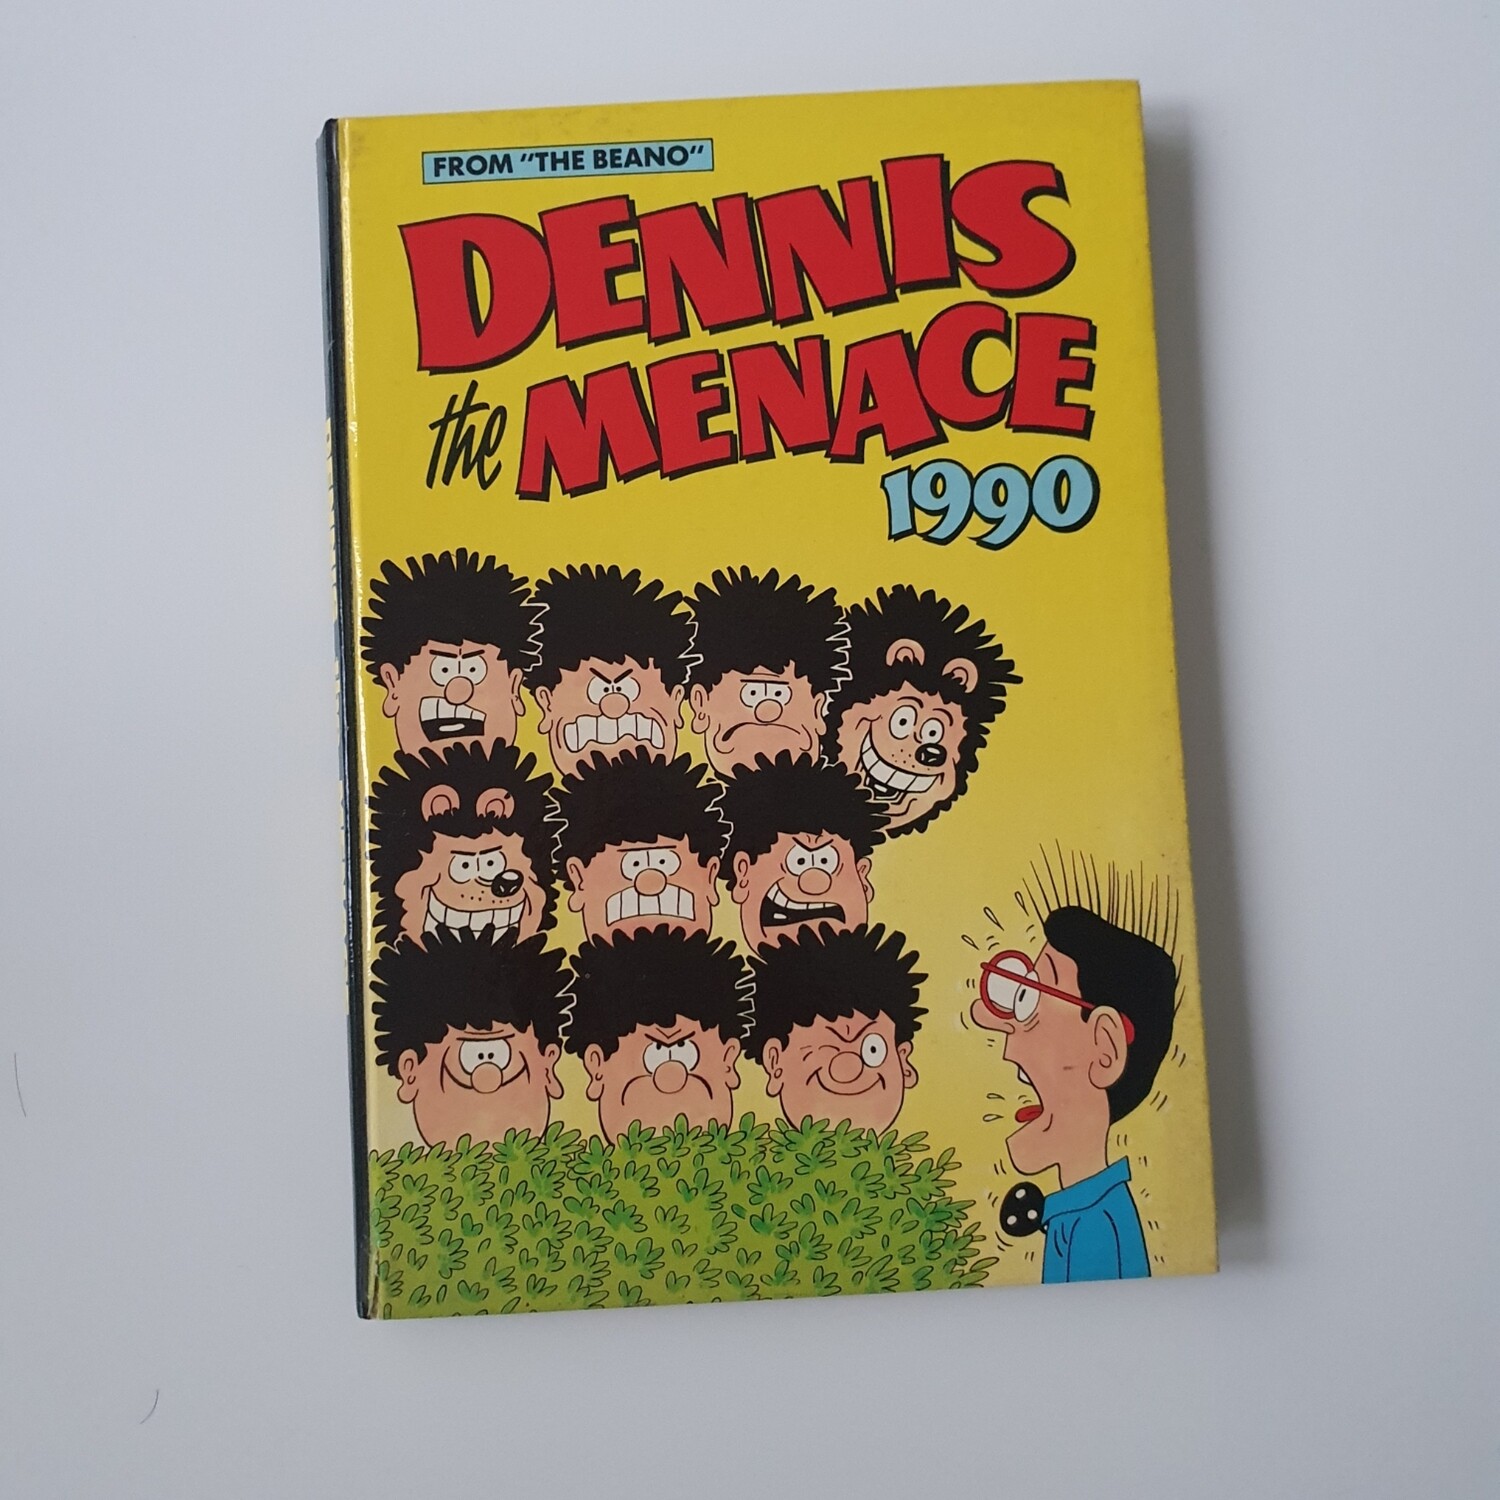 The Beano - Dennis the Menace - choose from a variety of covers 